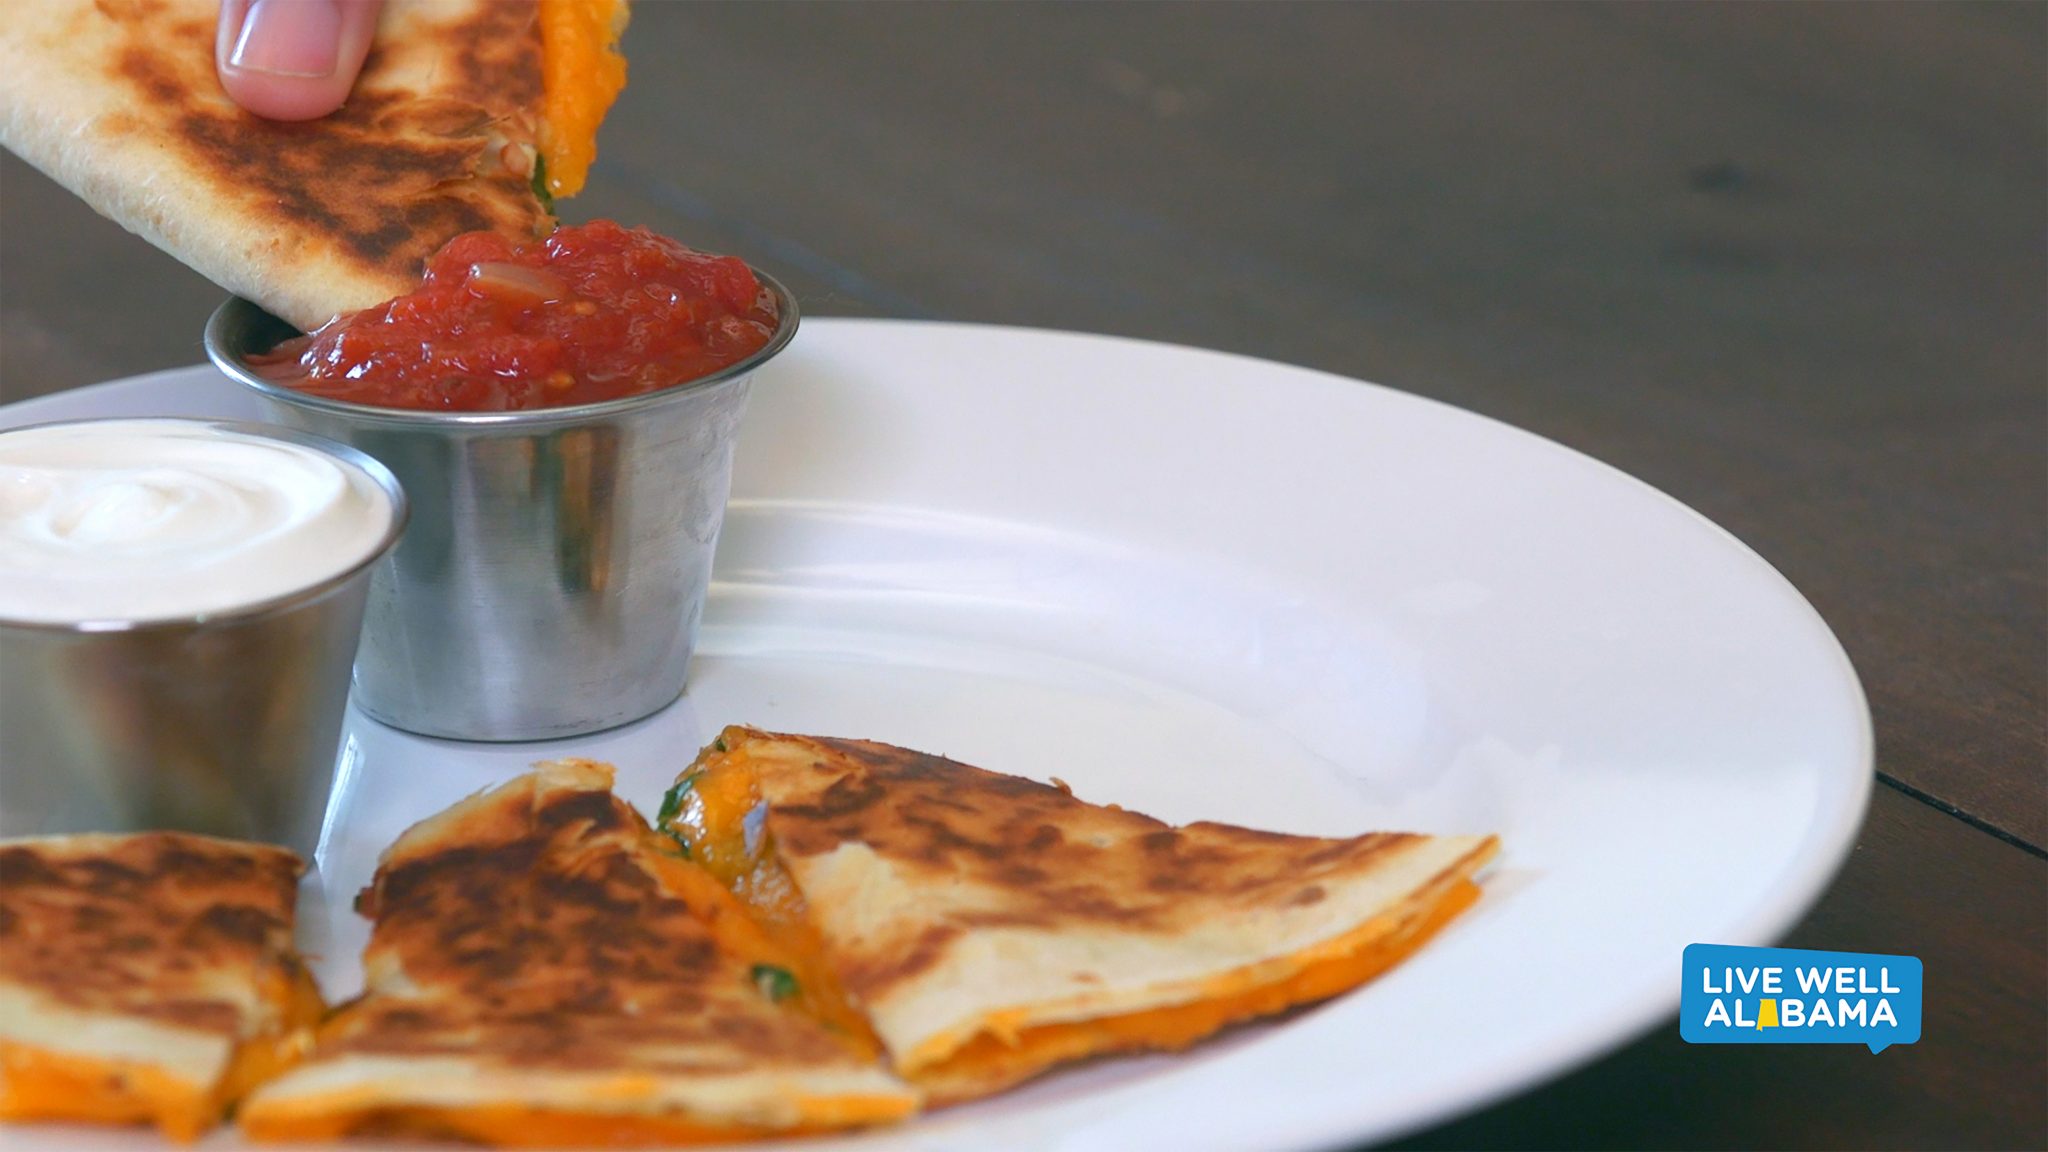 Cheesy quesadilla with spinach slices, dipped in salsa. Live Well Alabama recipe.